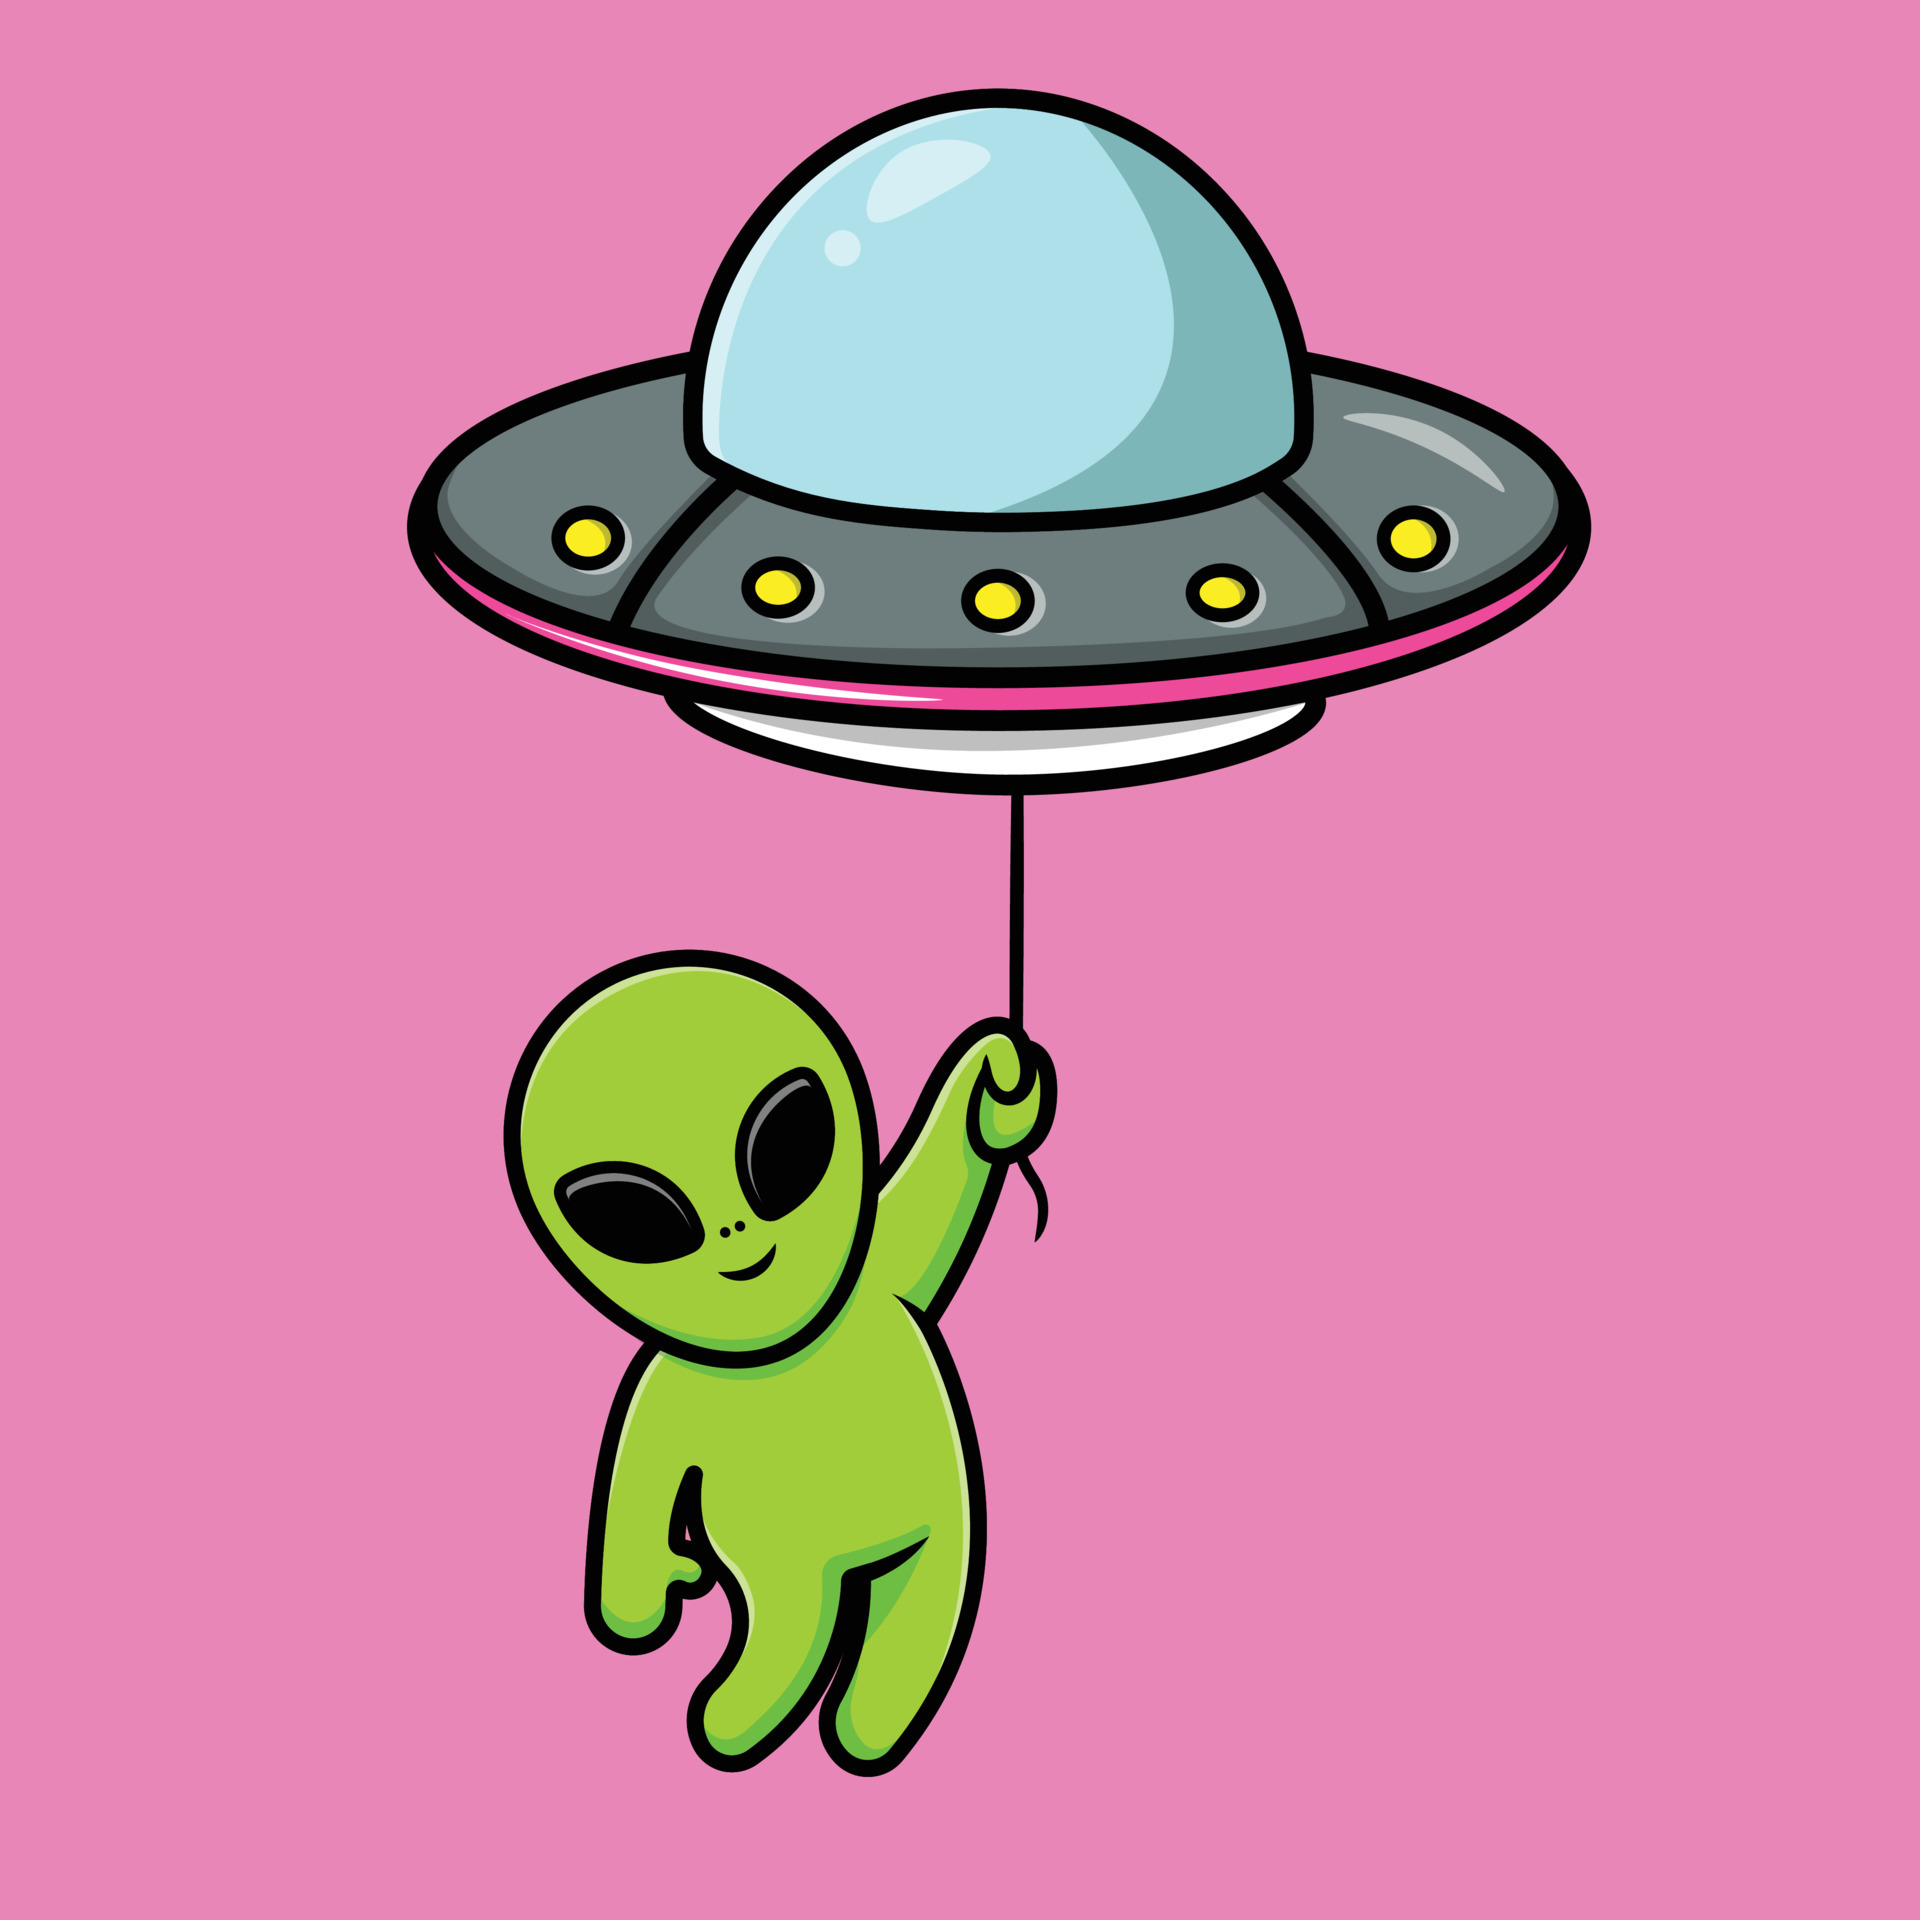 a green cartoon alien hangs on a string attached to a flying ufo. The background is pink.